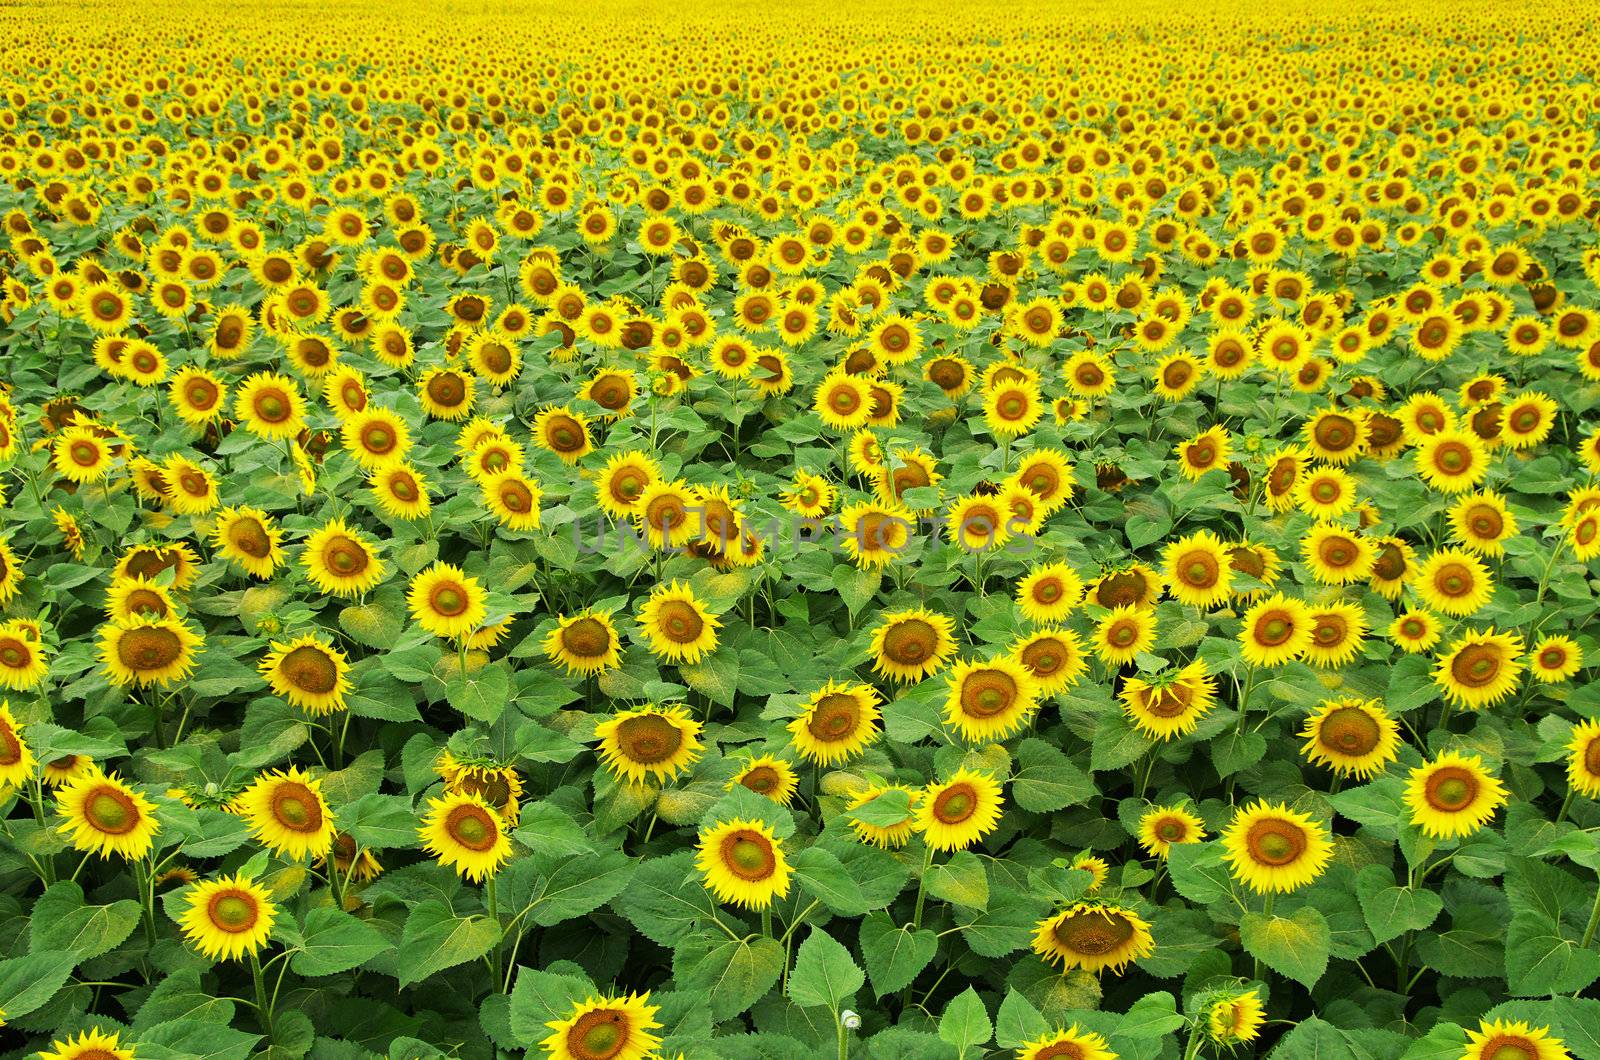 Closeup of a bright yellow sunflowers